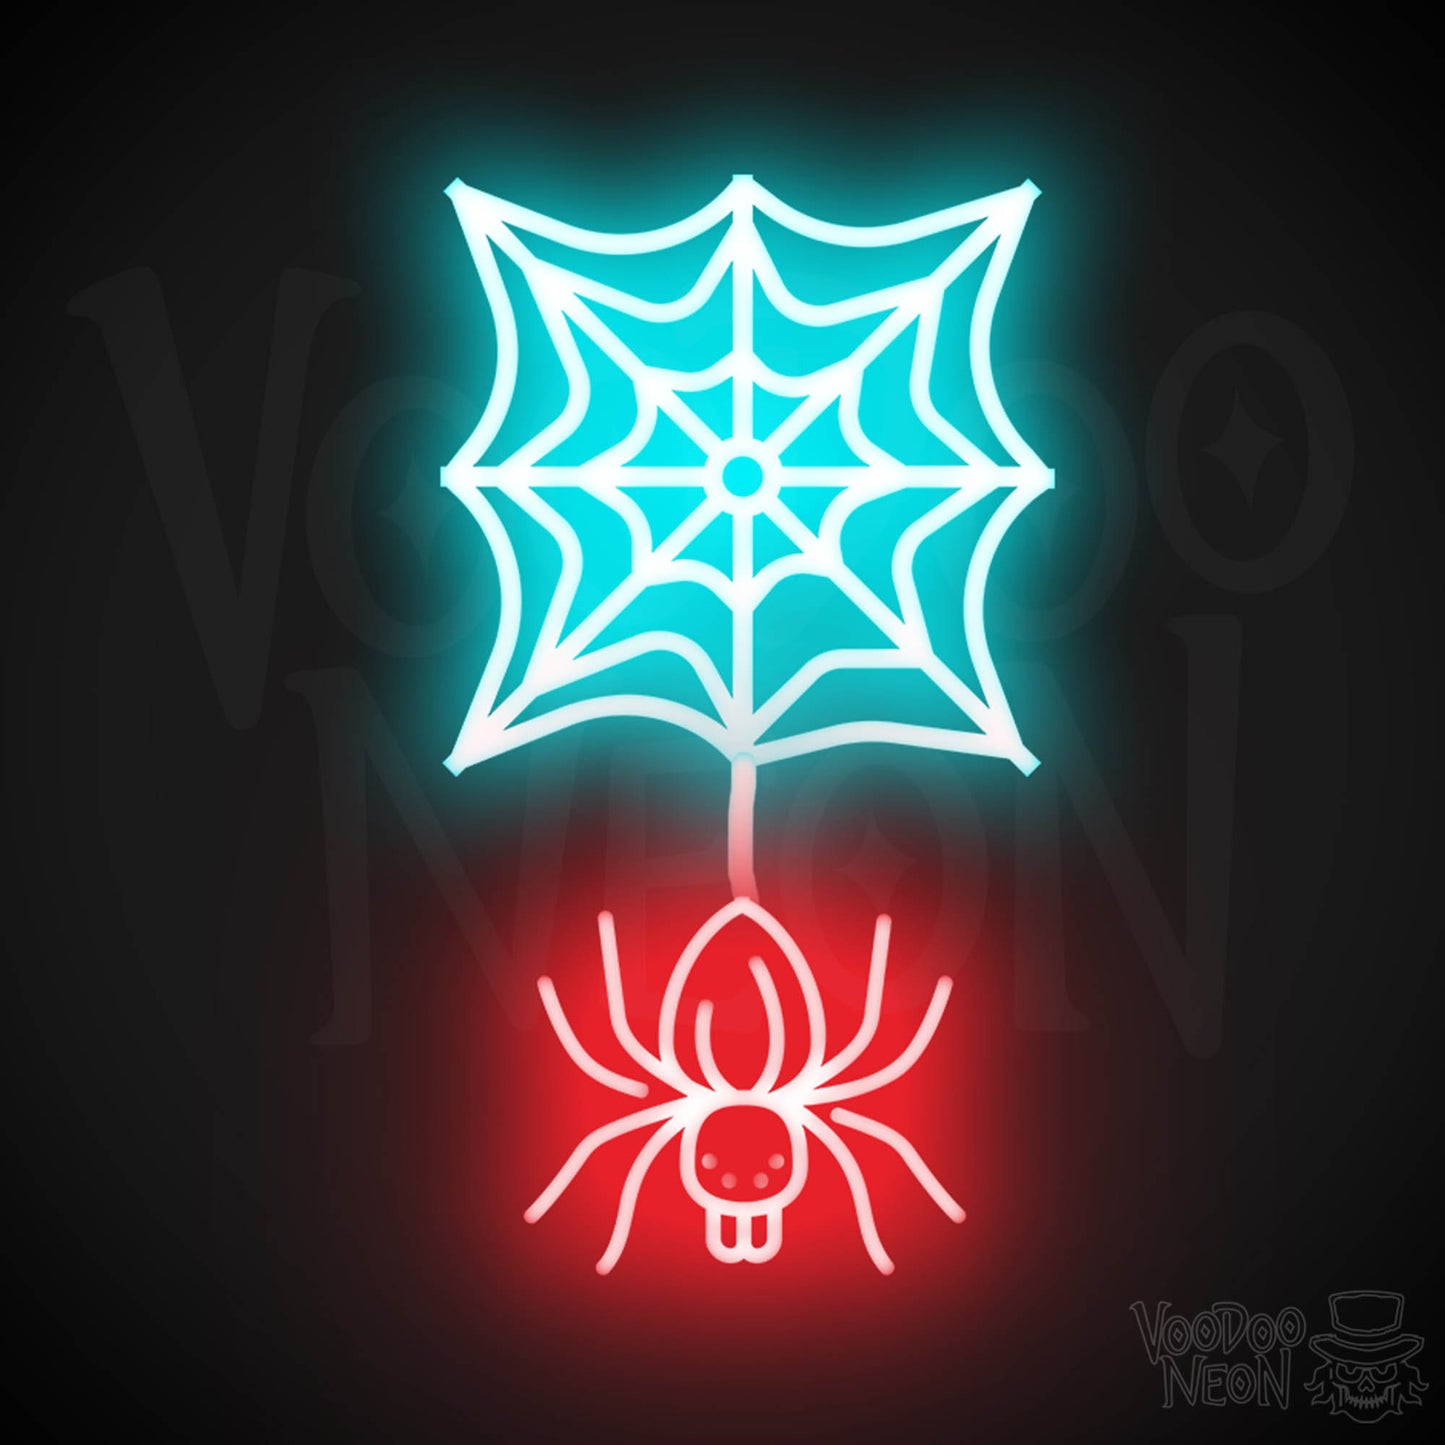 Neon Spider - Spider Neon Sign - Halloween LED Neon Spider - Color Multi-Color